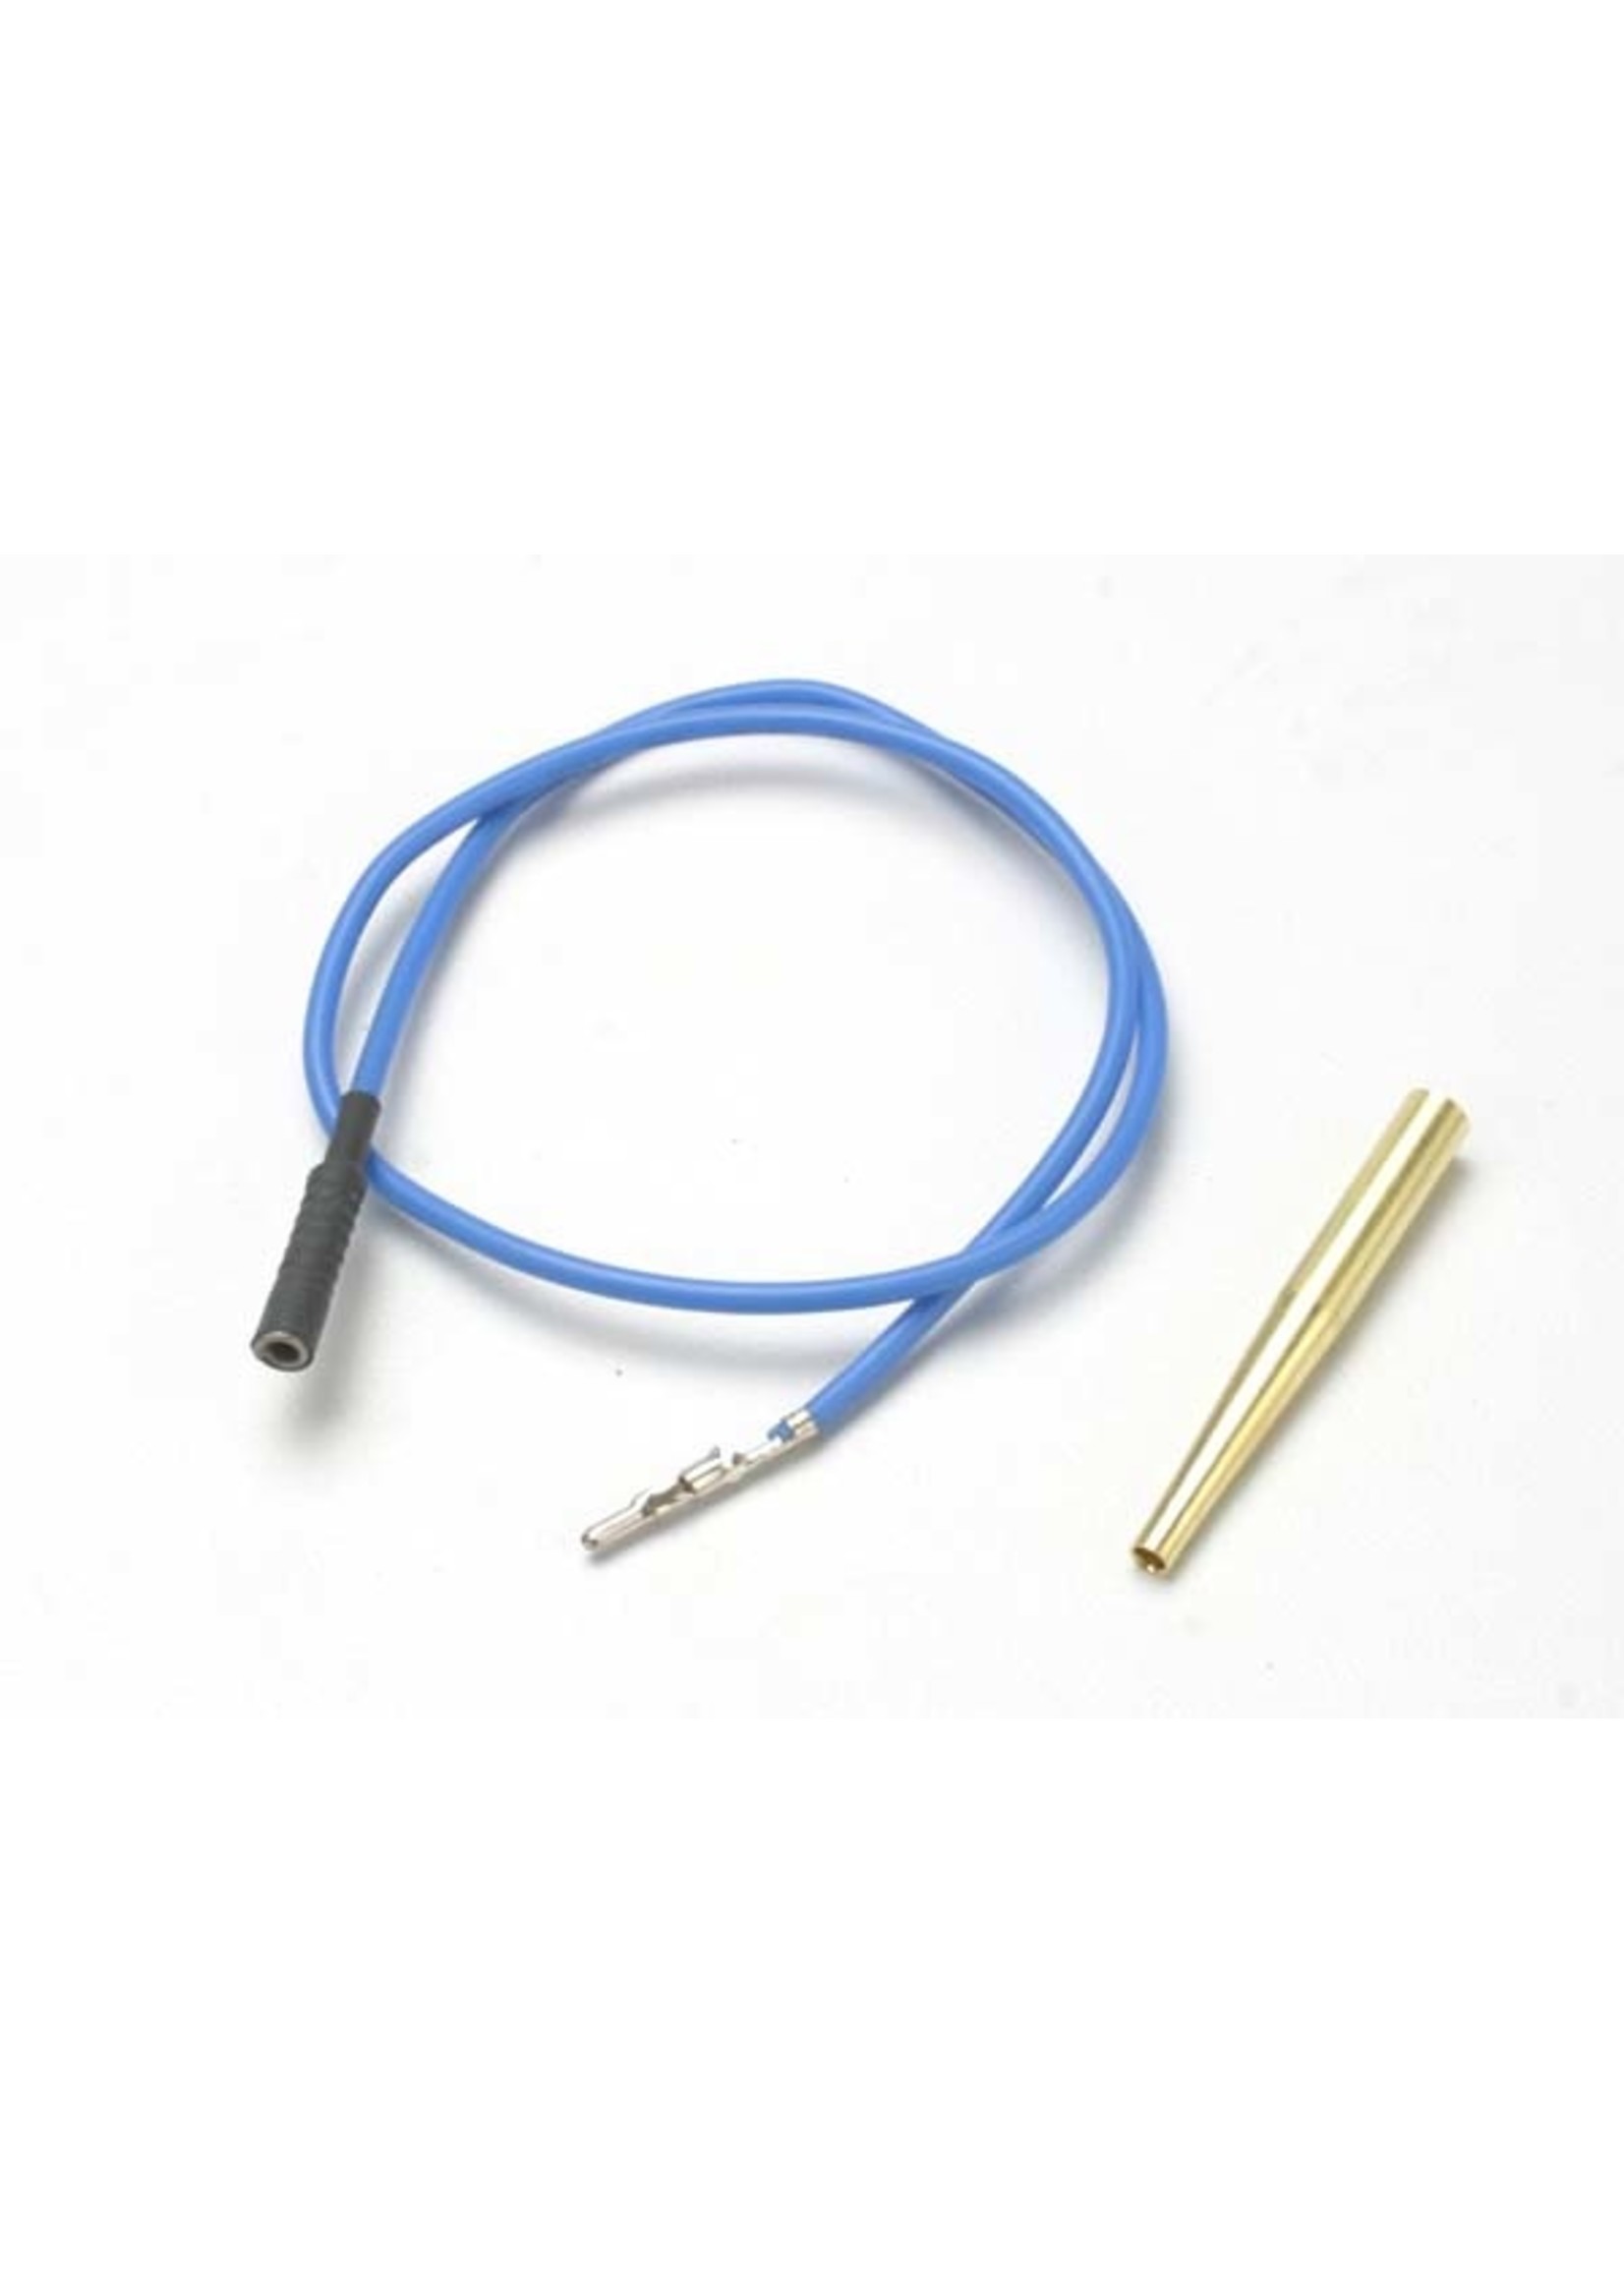 Traxxas TRA4581X Traxxas Lead wire, glow plug (blue) (EZ-Start and EZ-Start 2)/ molex pin extractor (use where glow plug wire does not have bullet connector)